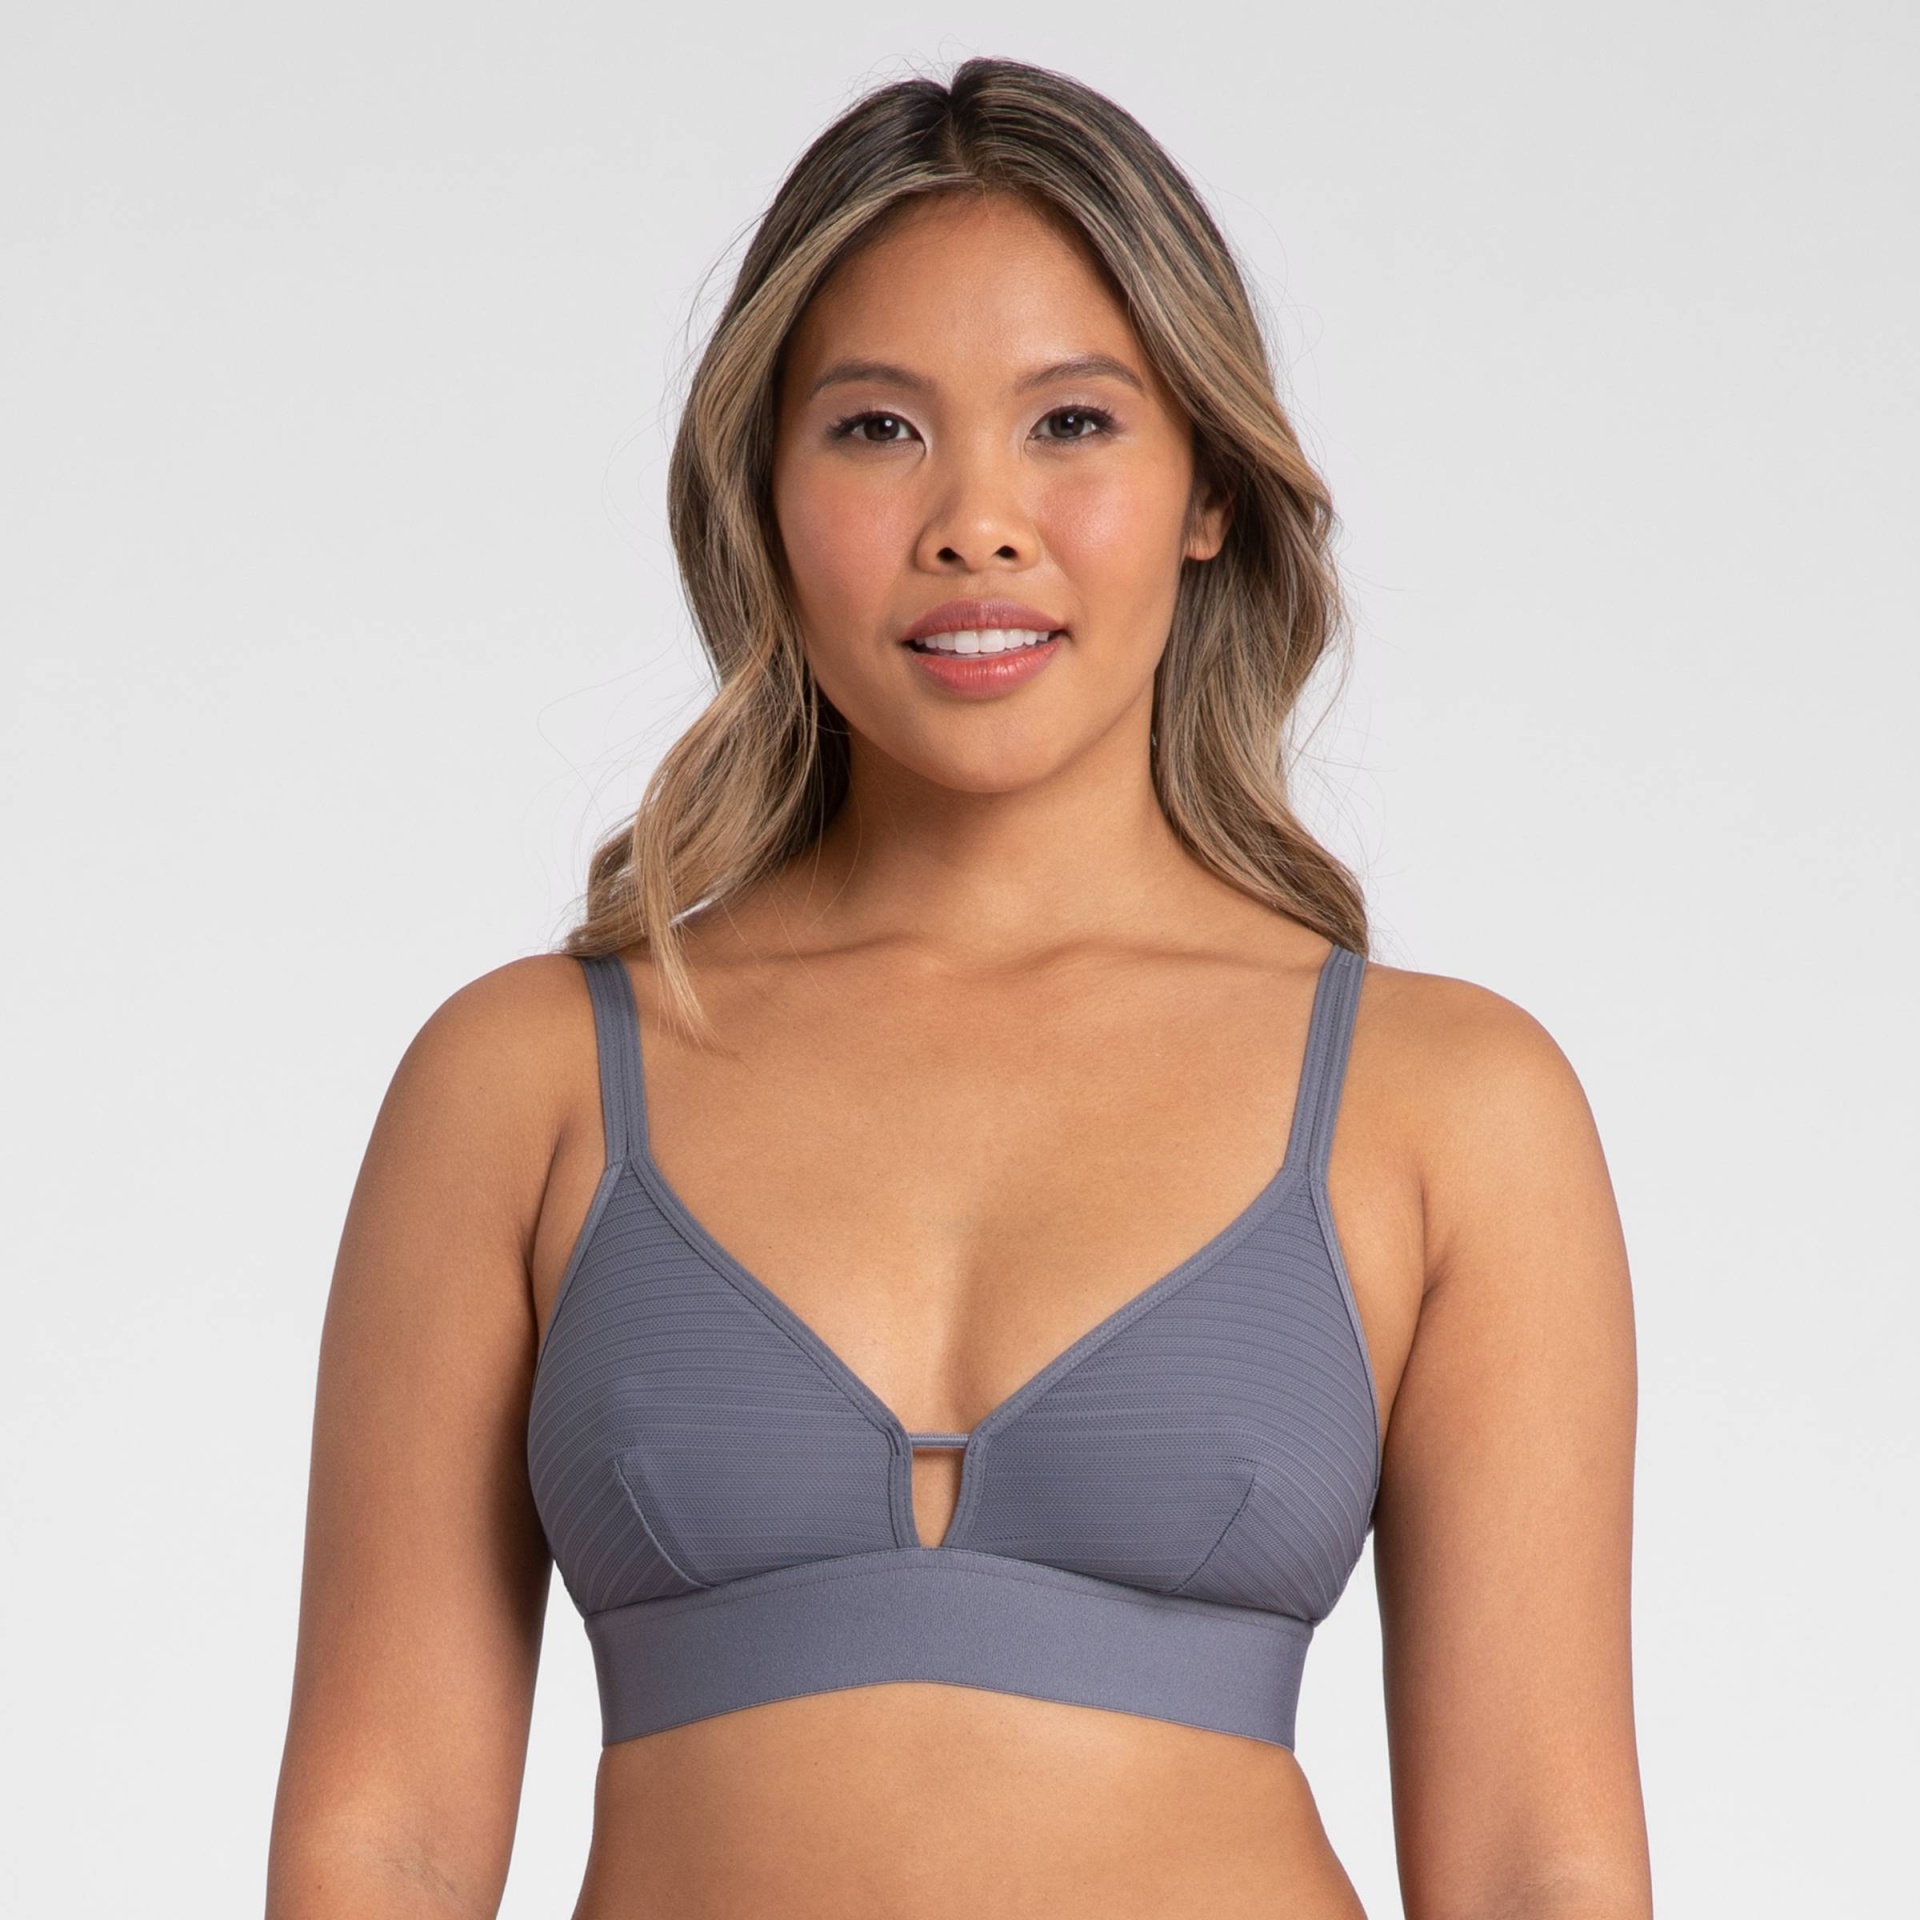 All.You.LIVELY All.You. LIVELY Women's Stripe Mesh Bralette - Smoke M 1 ct